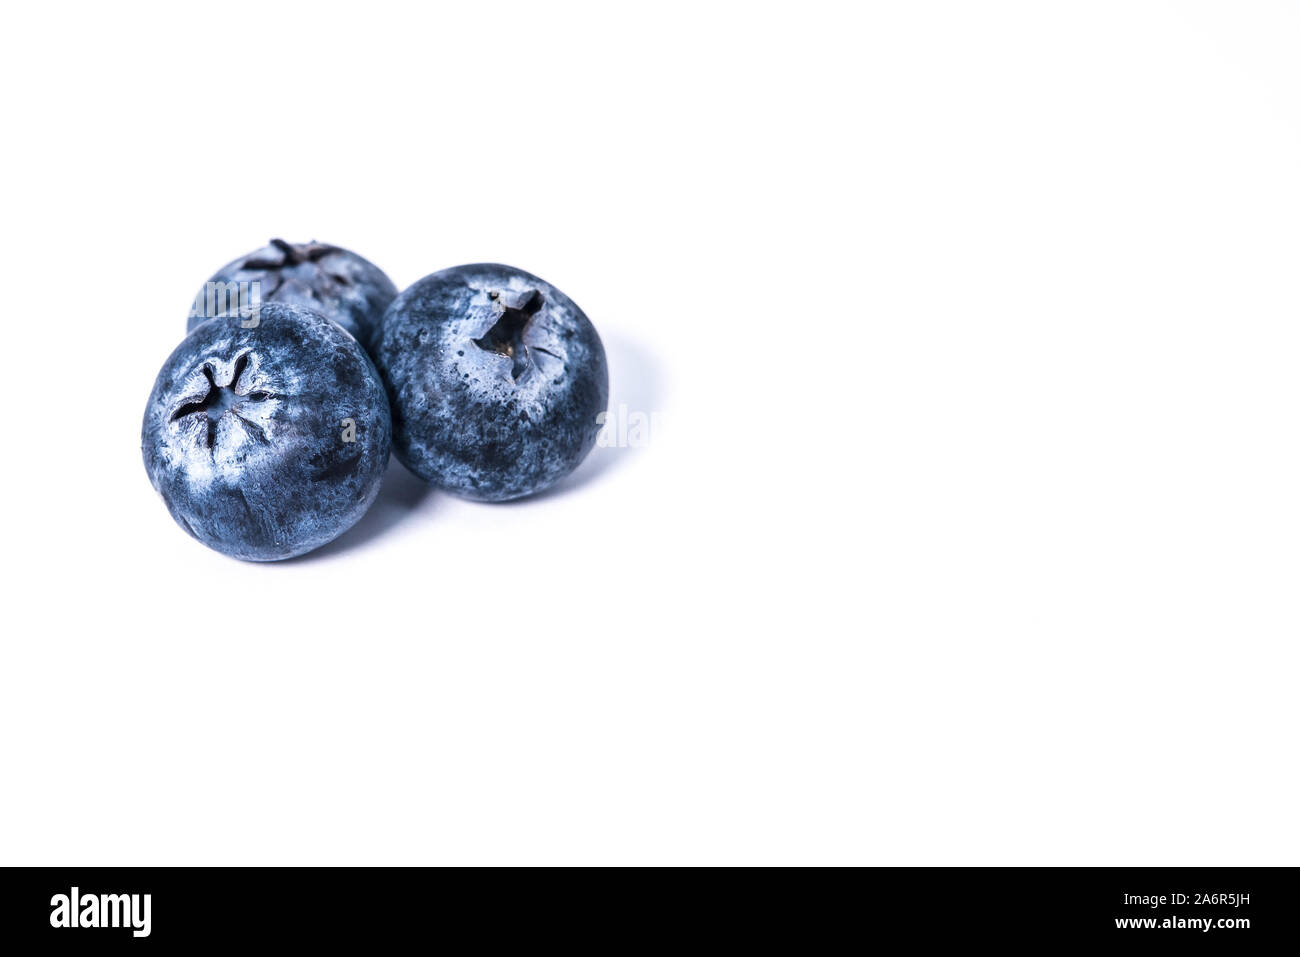 Blueberries on a white background Stock Photo